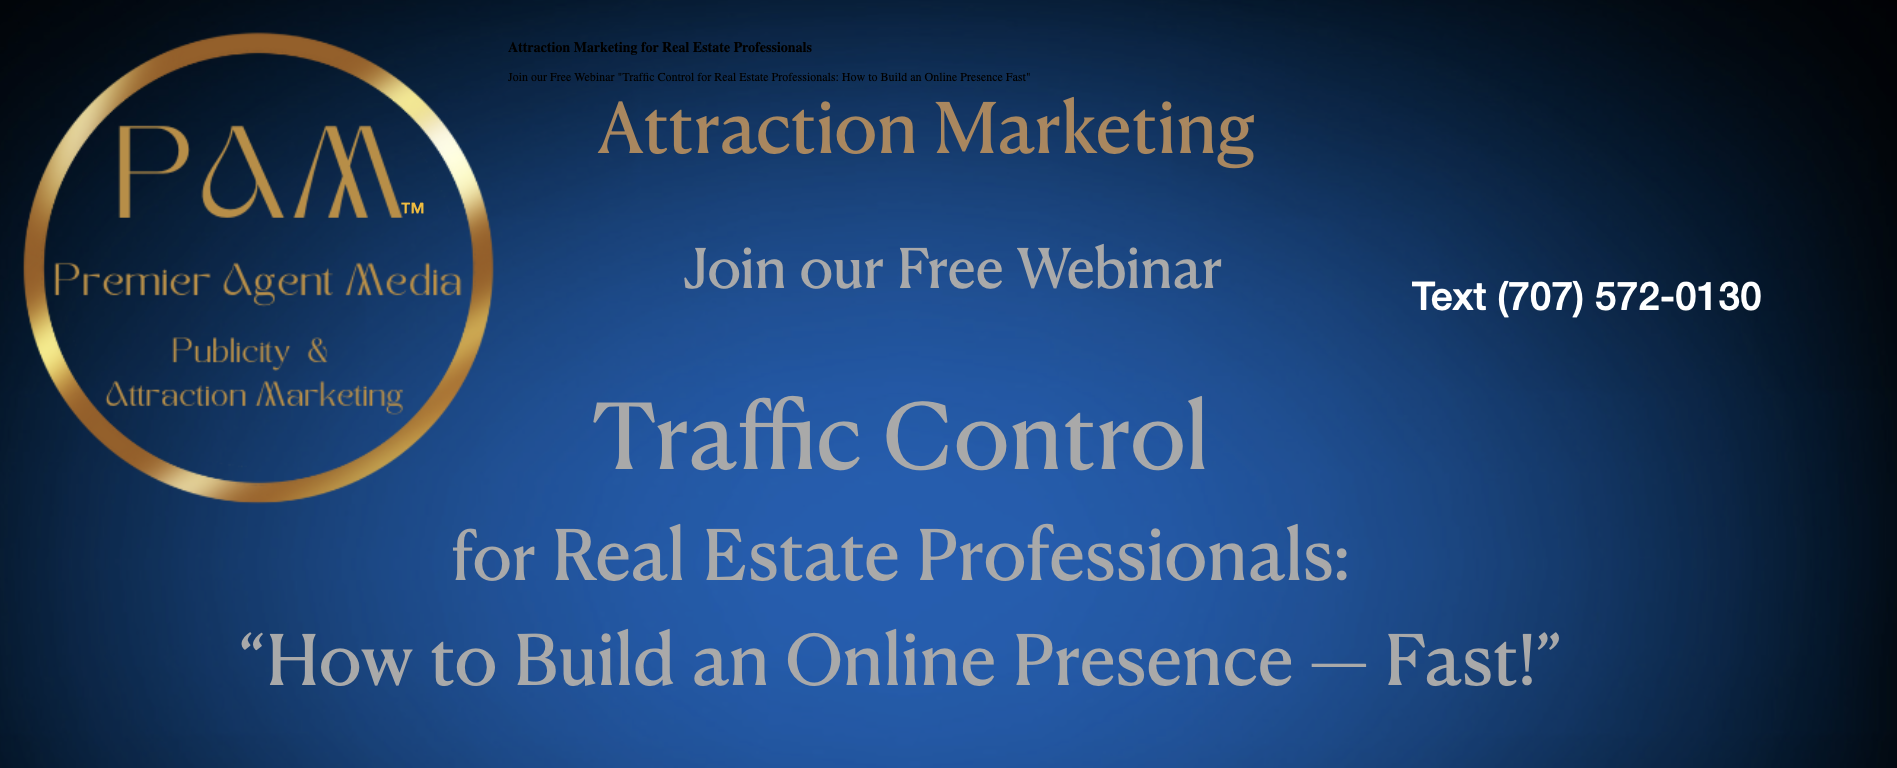 Attraction Marketing Webinar for real estate professionals